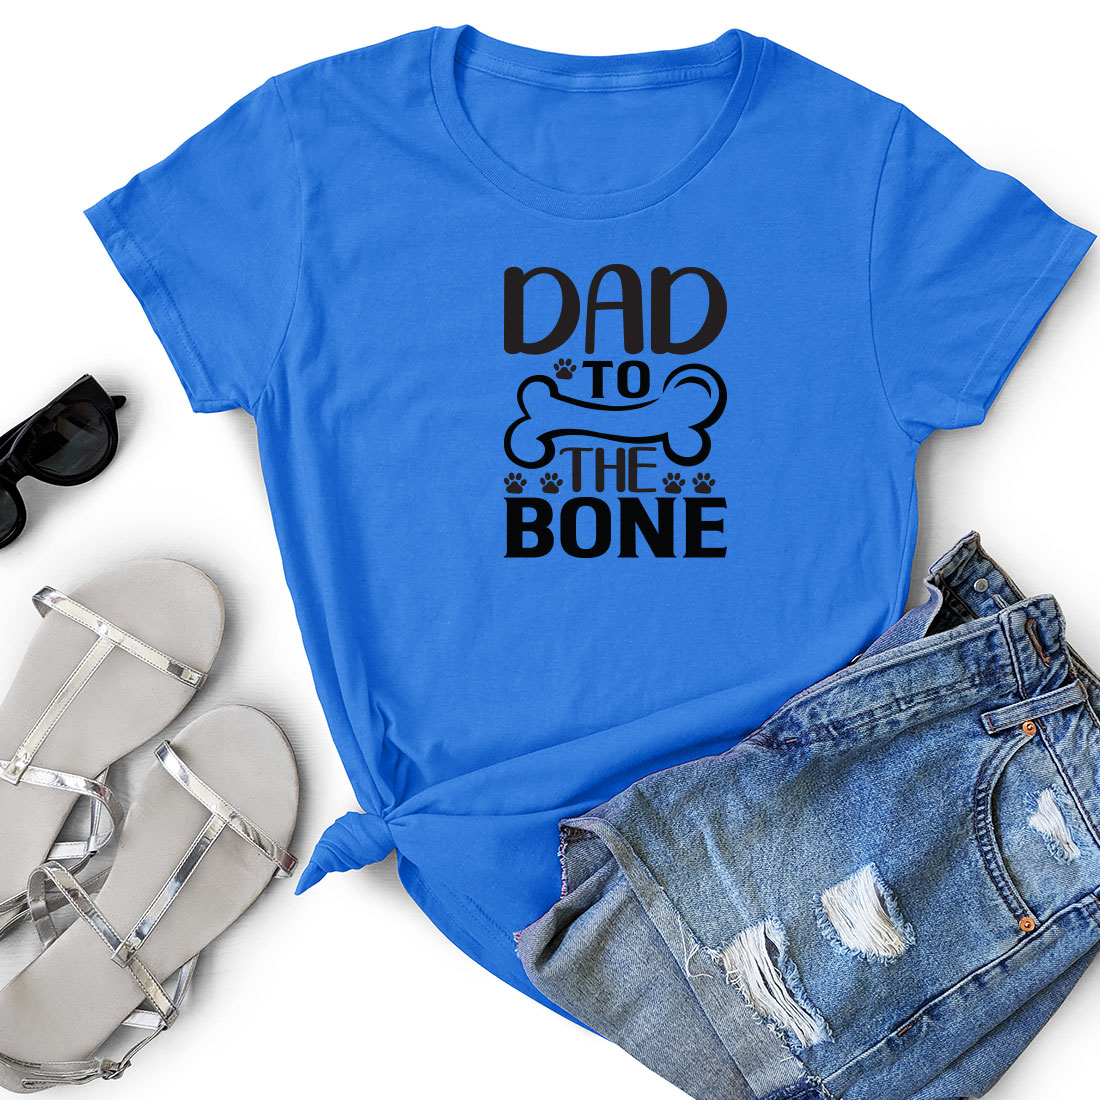 T - shirt that says dad to the bone next to a pair of shorts.